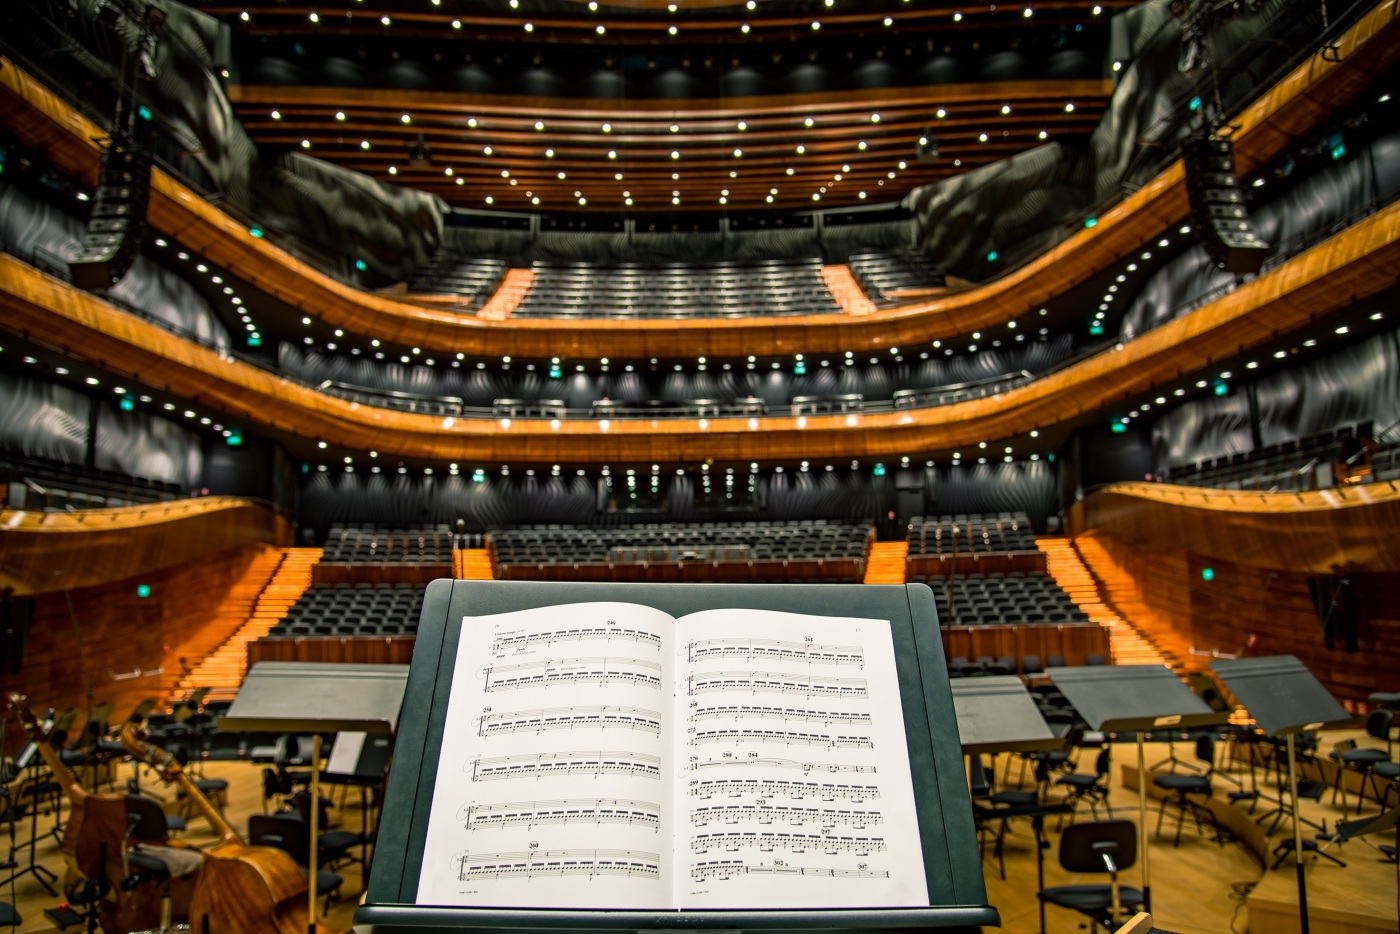 Conductor's view of an auditorium